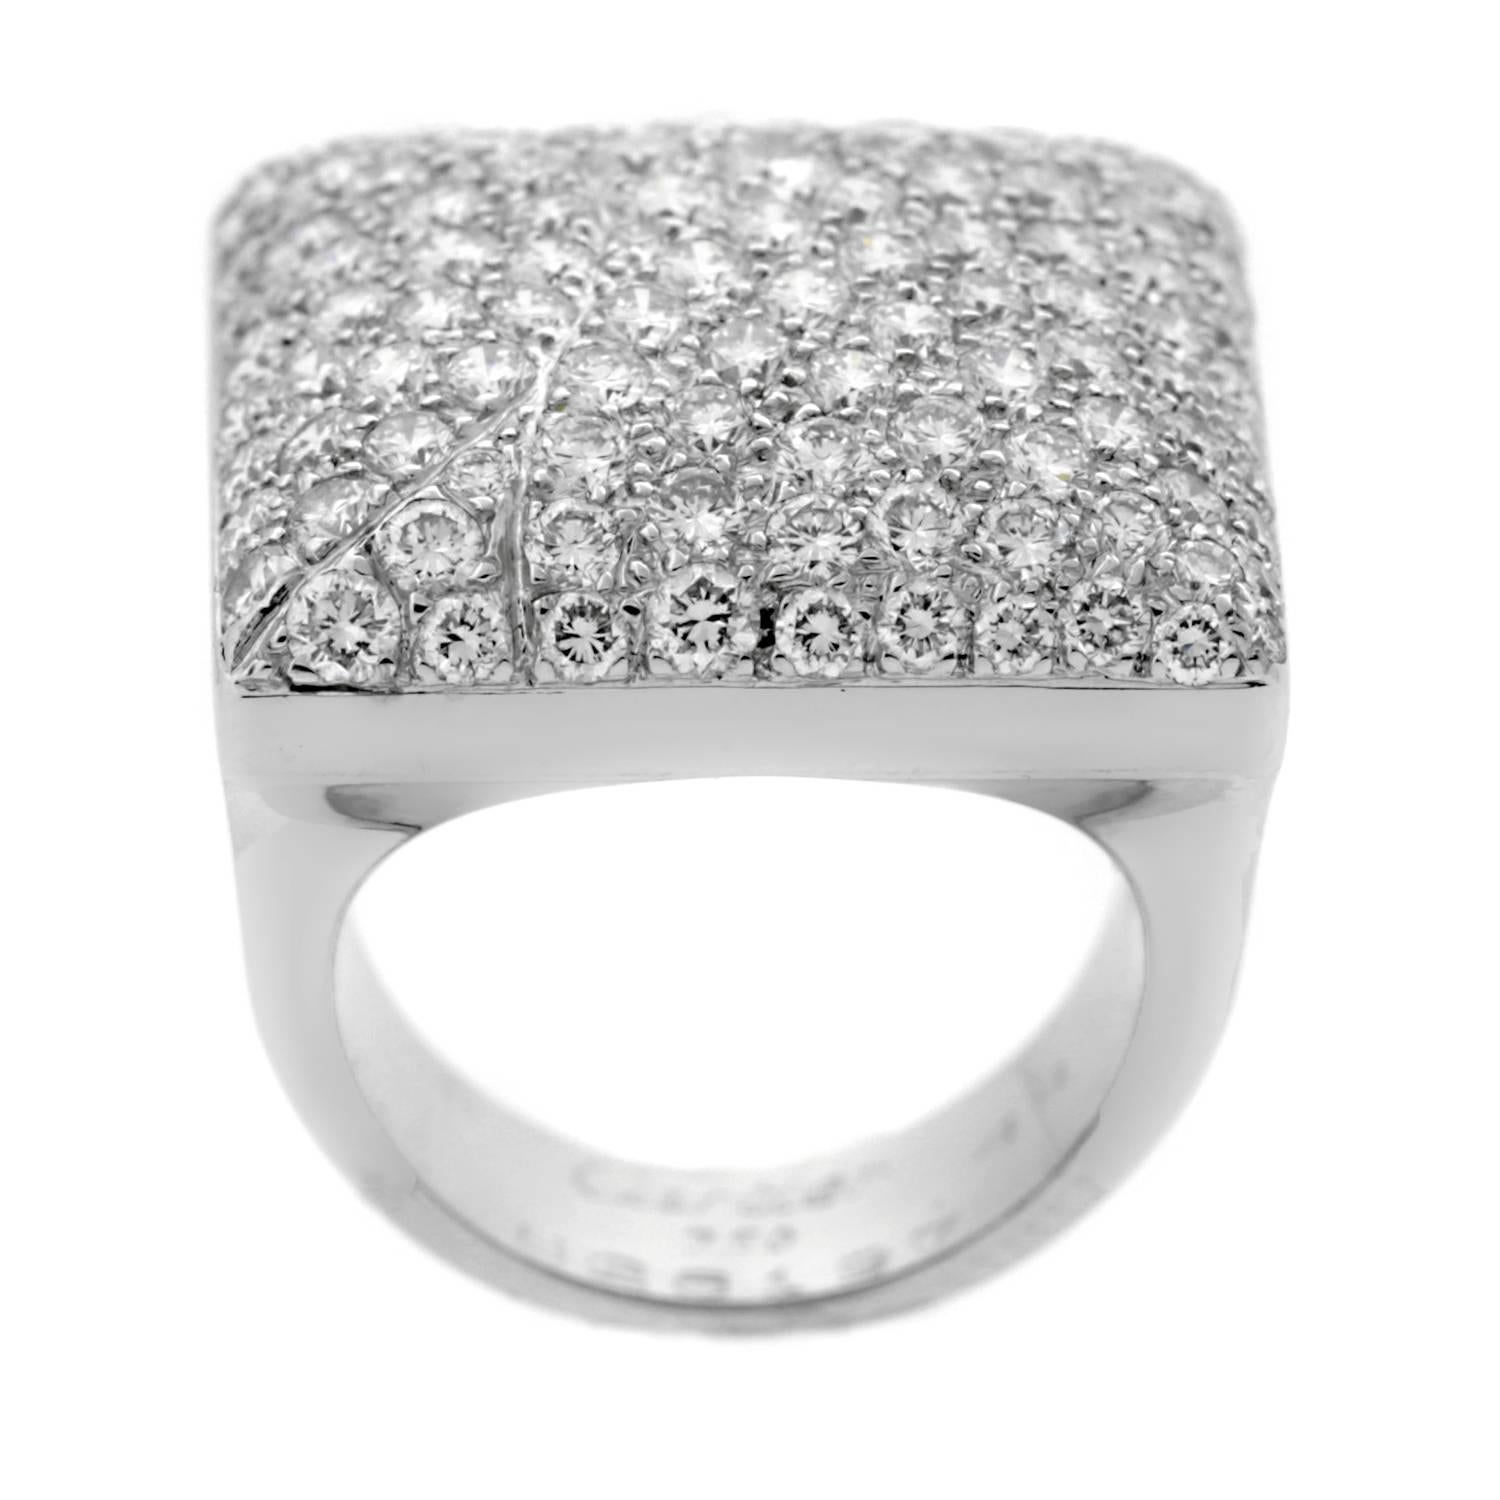 A fabulous authentic Cartier ring adorned with 3.5cts appx of the finest Cartier round brilliant cut diamonds set in 18k white gold.

Size: 48 / US 4 1/2 ( Resizeable)
Dimensions: .80″ Inches

Inventory ID: 0000138